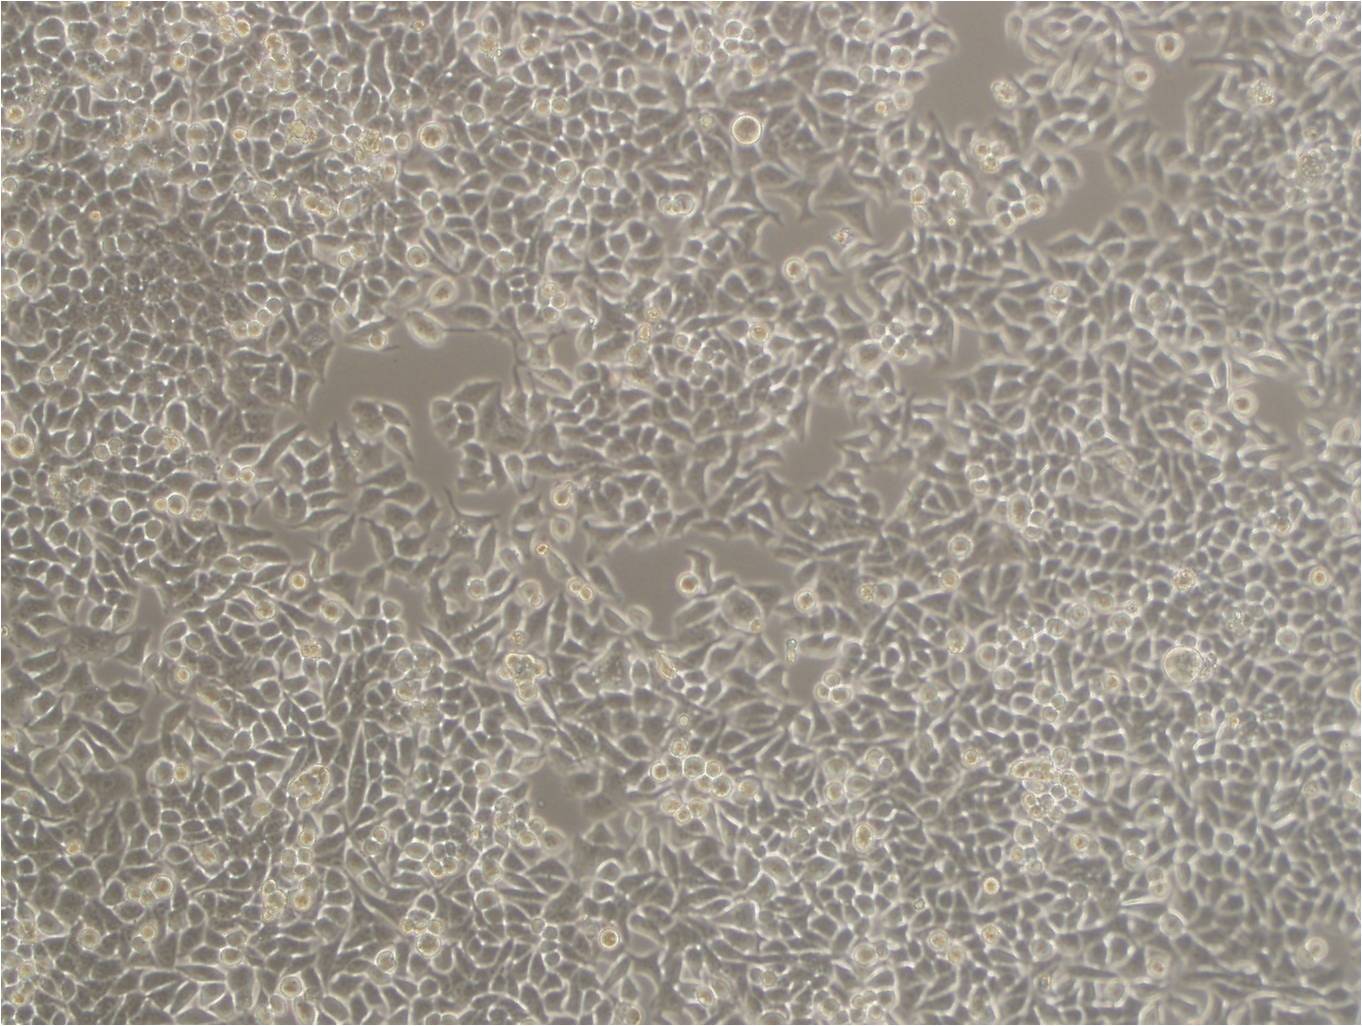 PG-LH7 epithelioid cells人肺癌低转移细胞系,PG-LH7 epithelioid cells